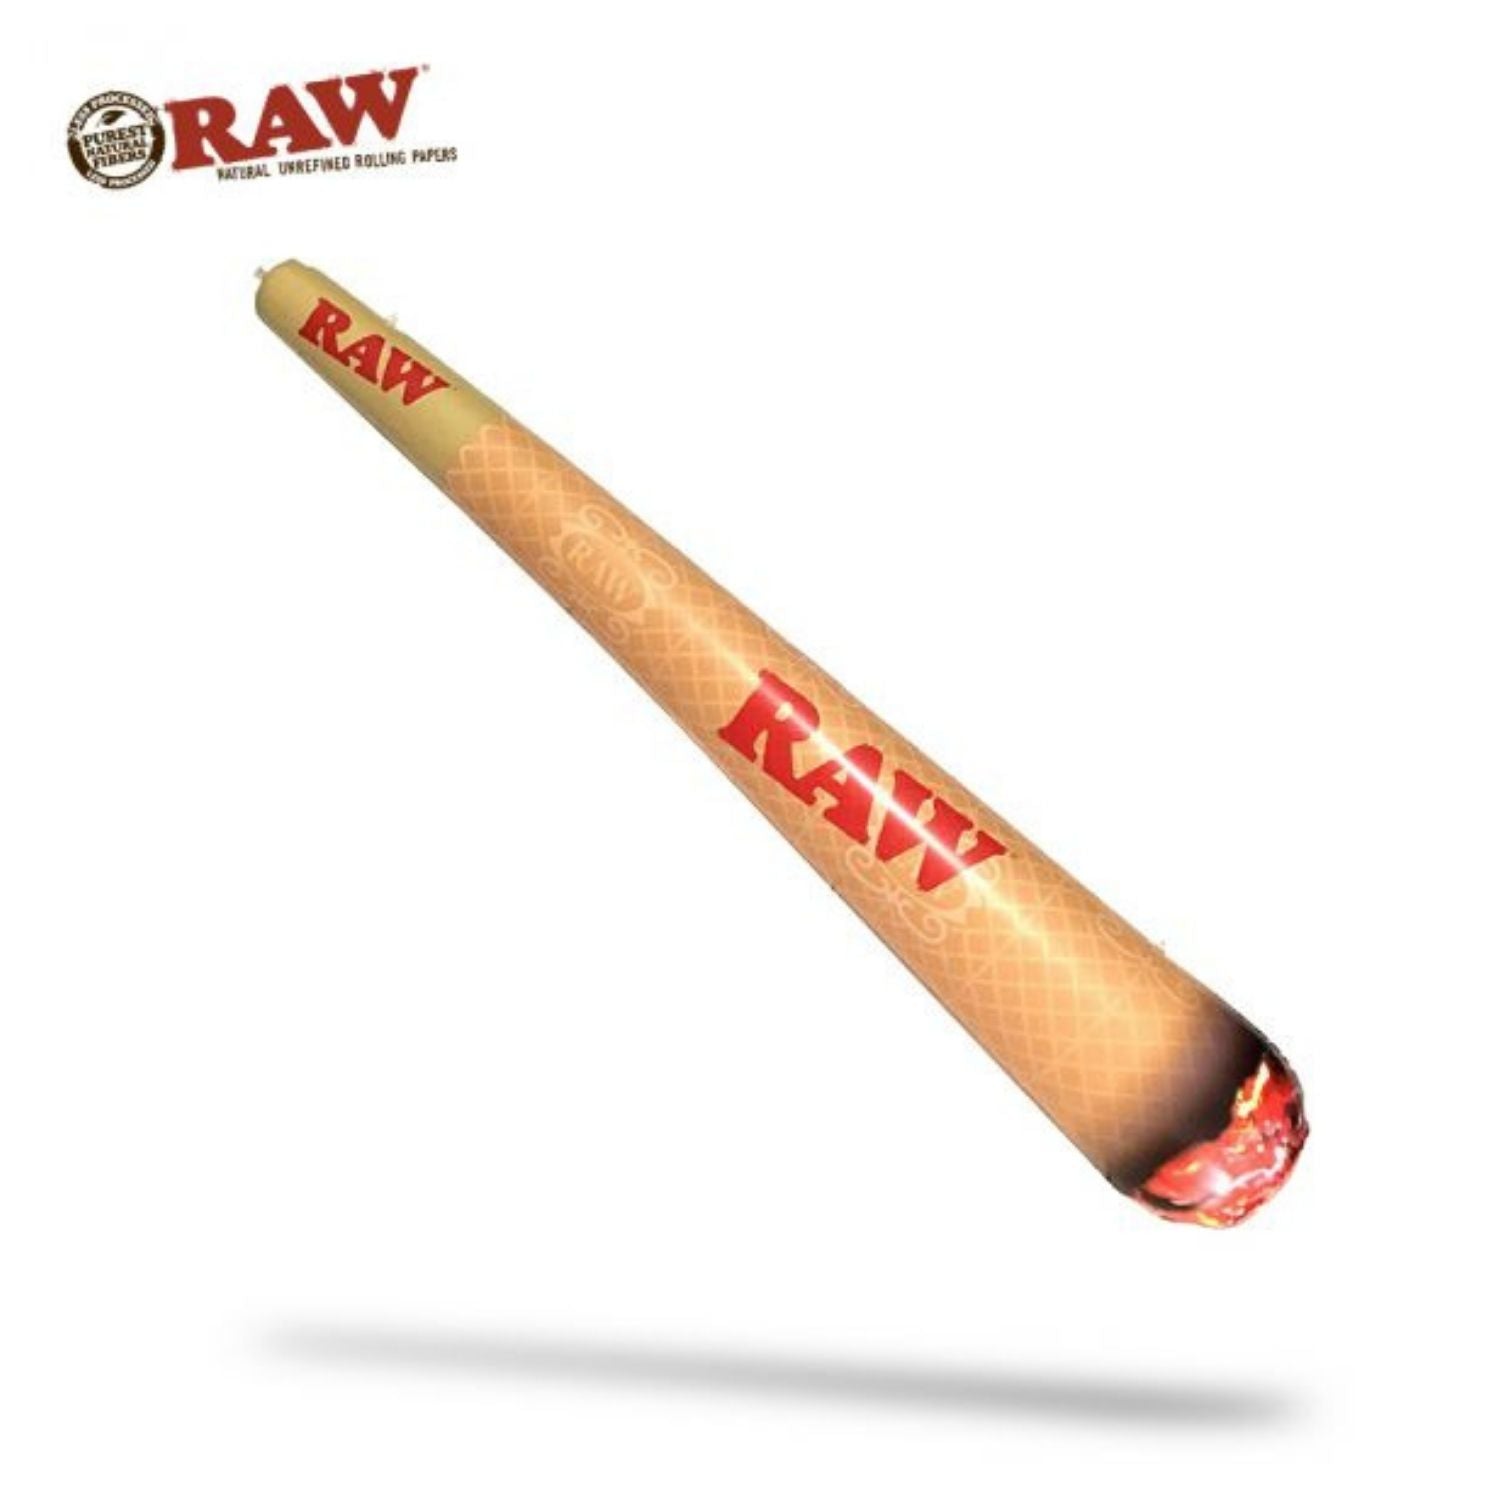 RAW Inflatable Cone - 2 Feet Long